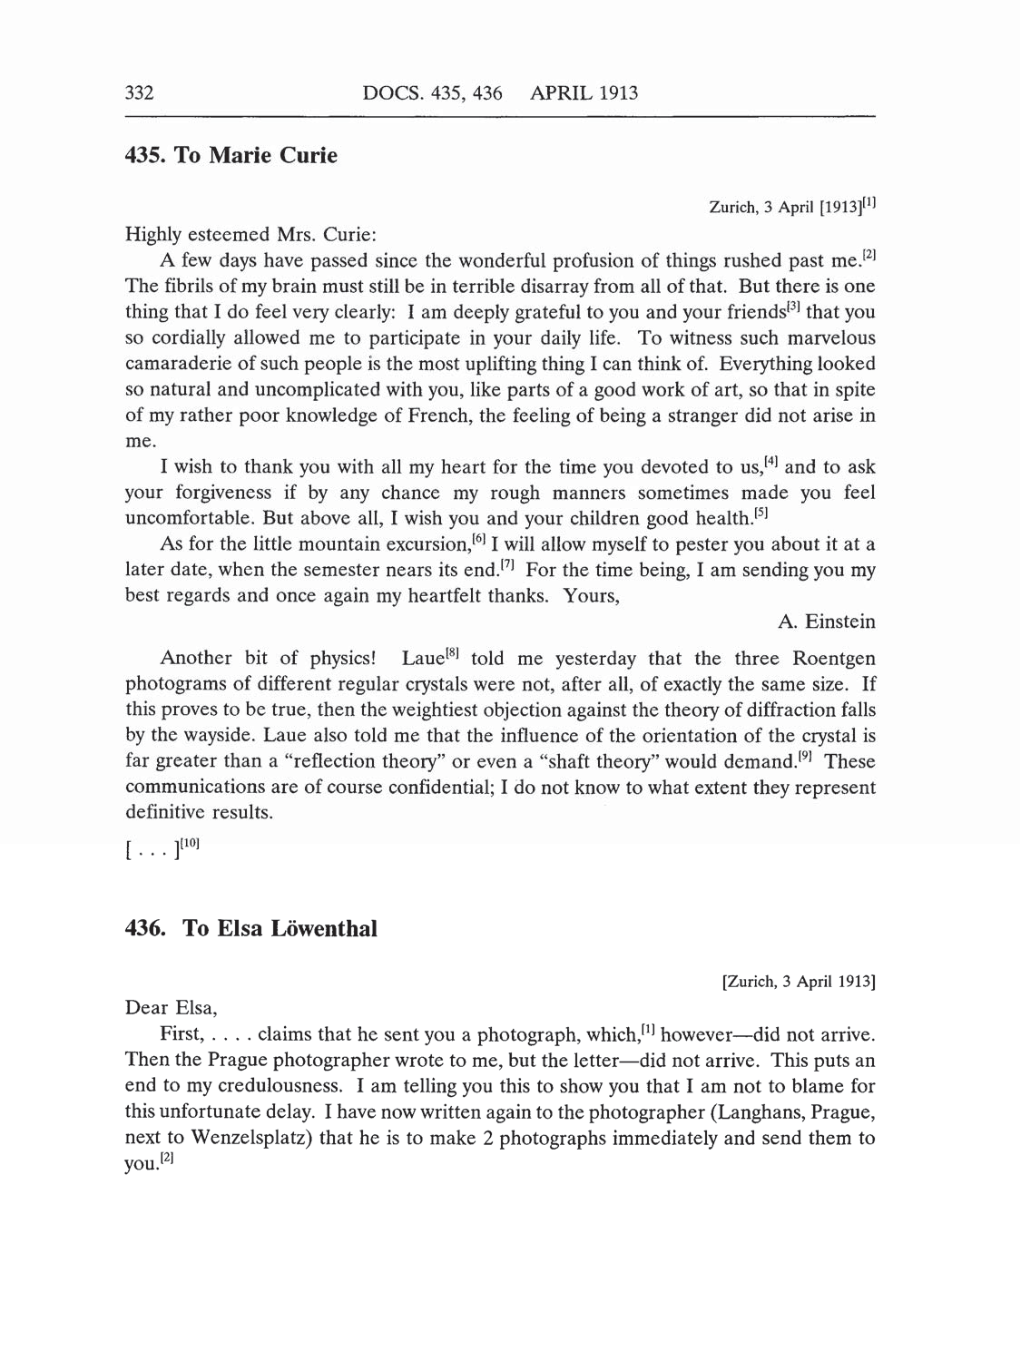 Volume 5: The Swiss Years: Correspondence, 1902-1914 (English translation supplement) page 332